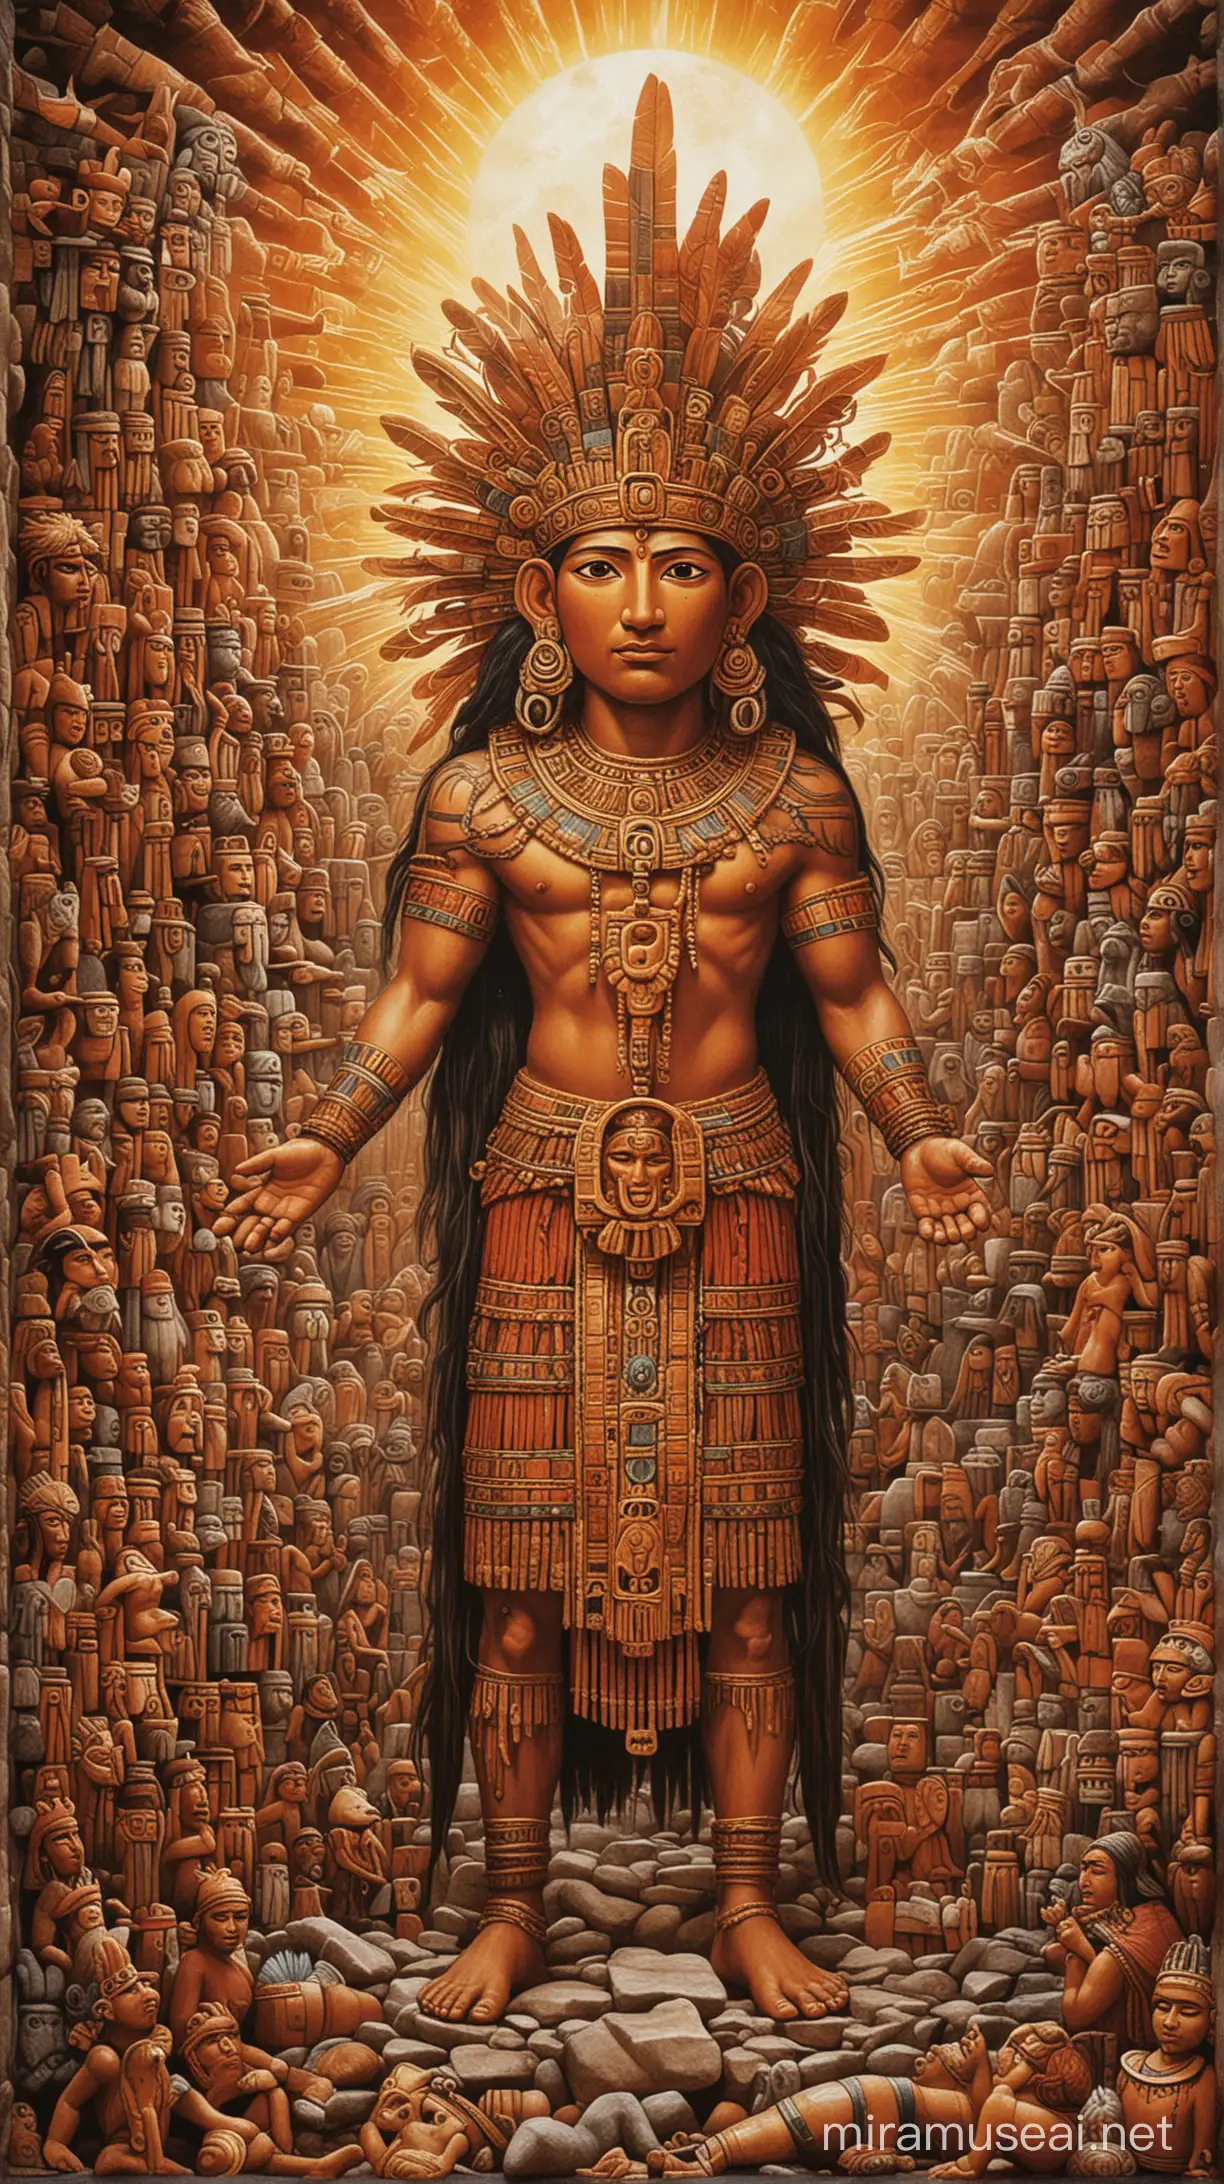 A symbolic image of the Inca god Inti, the sun god, depicted as a powerful and demanding deity, surrounded by offerings and sacrifices.
